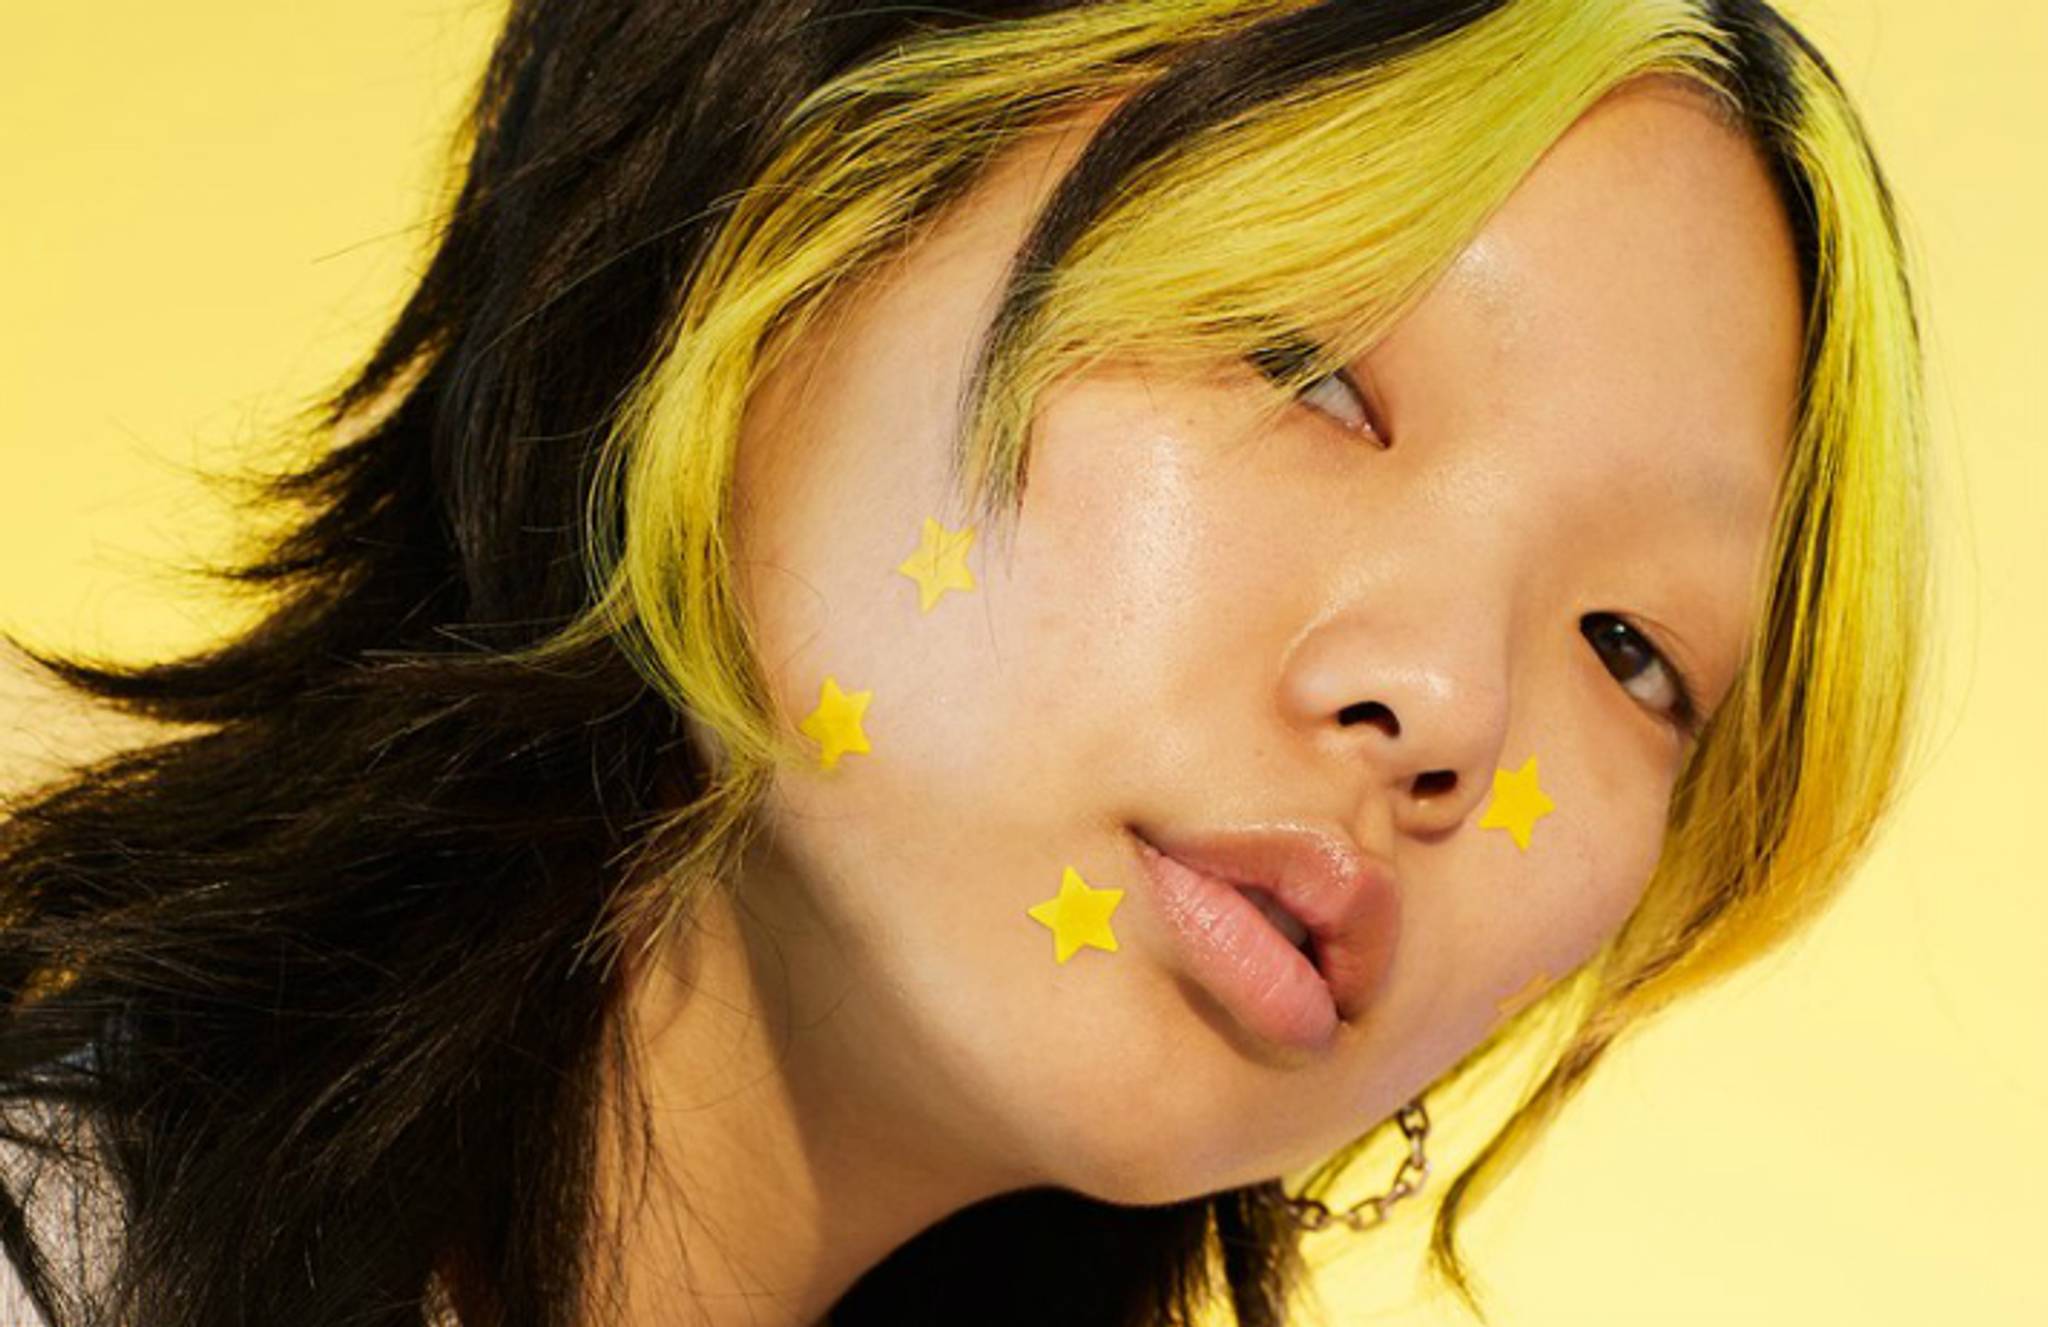 Star-shaped pimple patches add fun to acne treatment